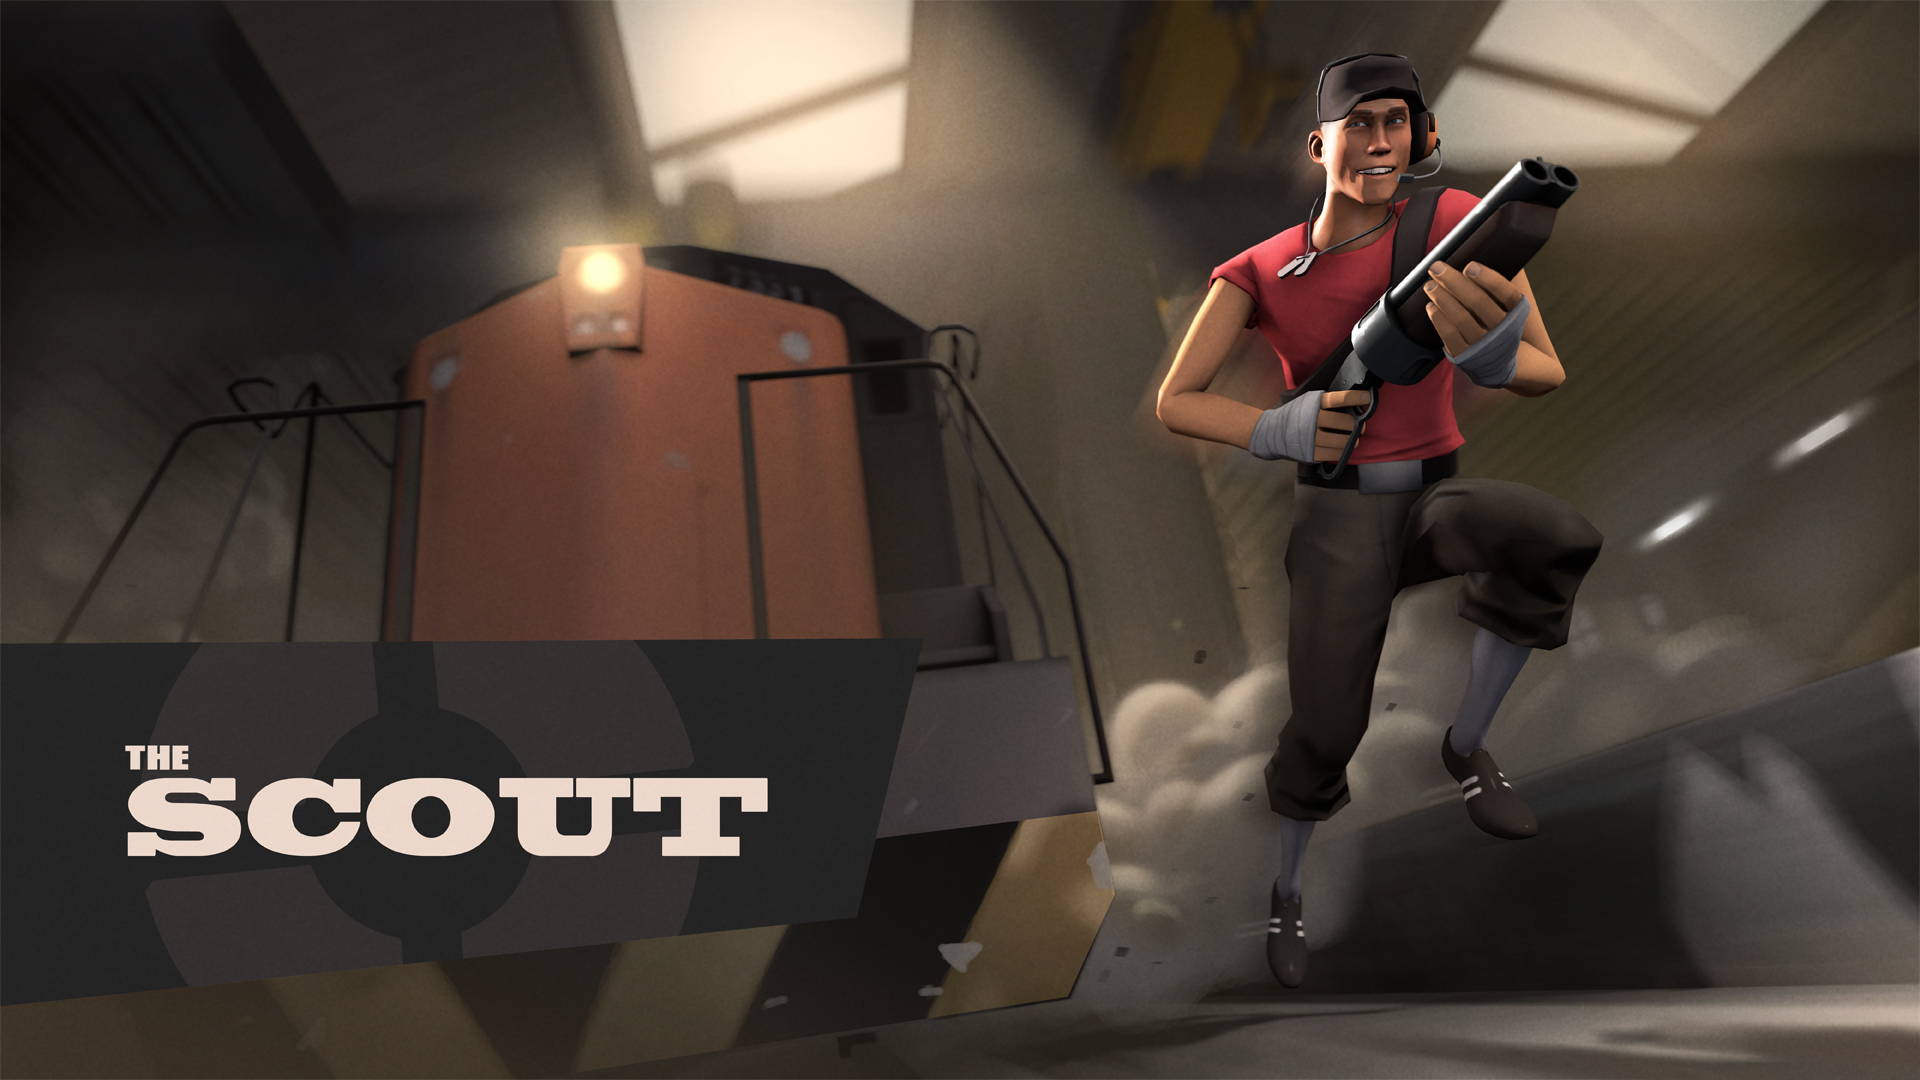 Meet the Scout Graphic